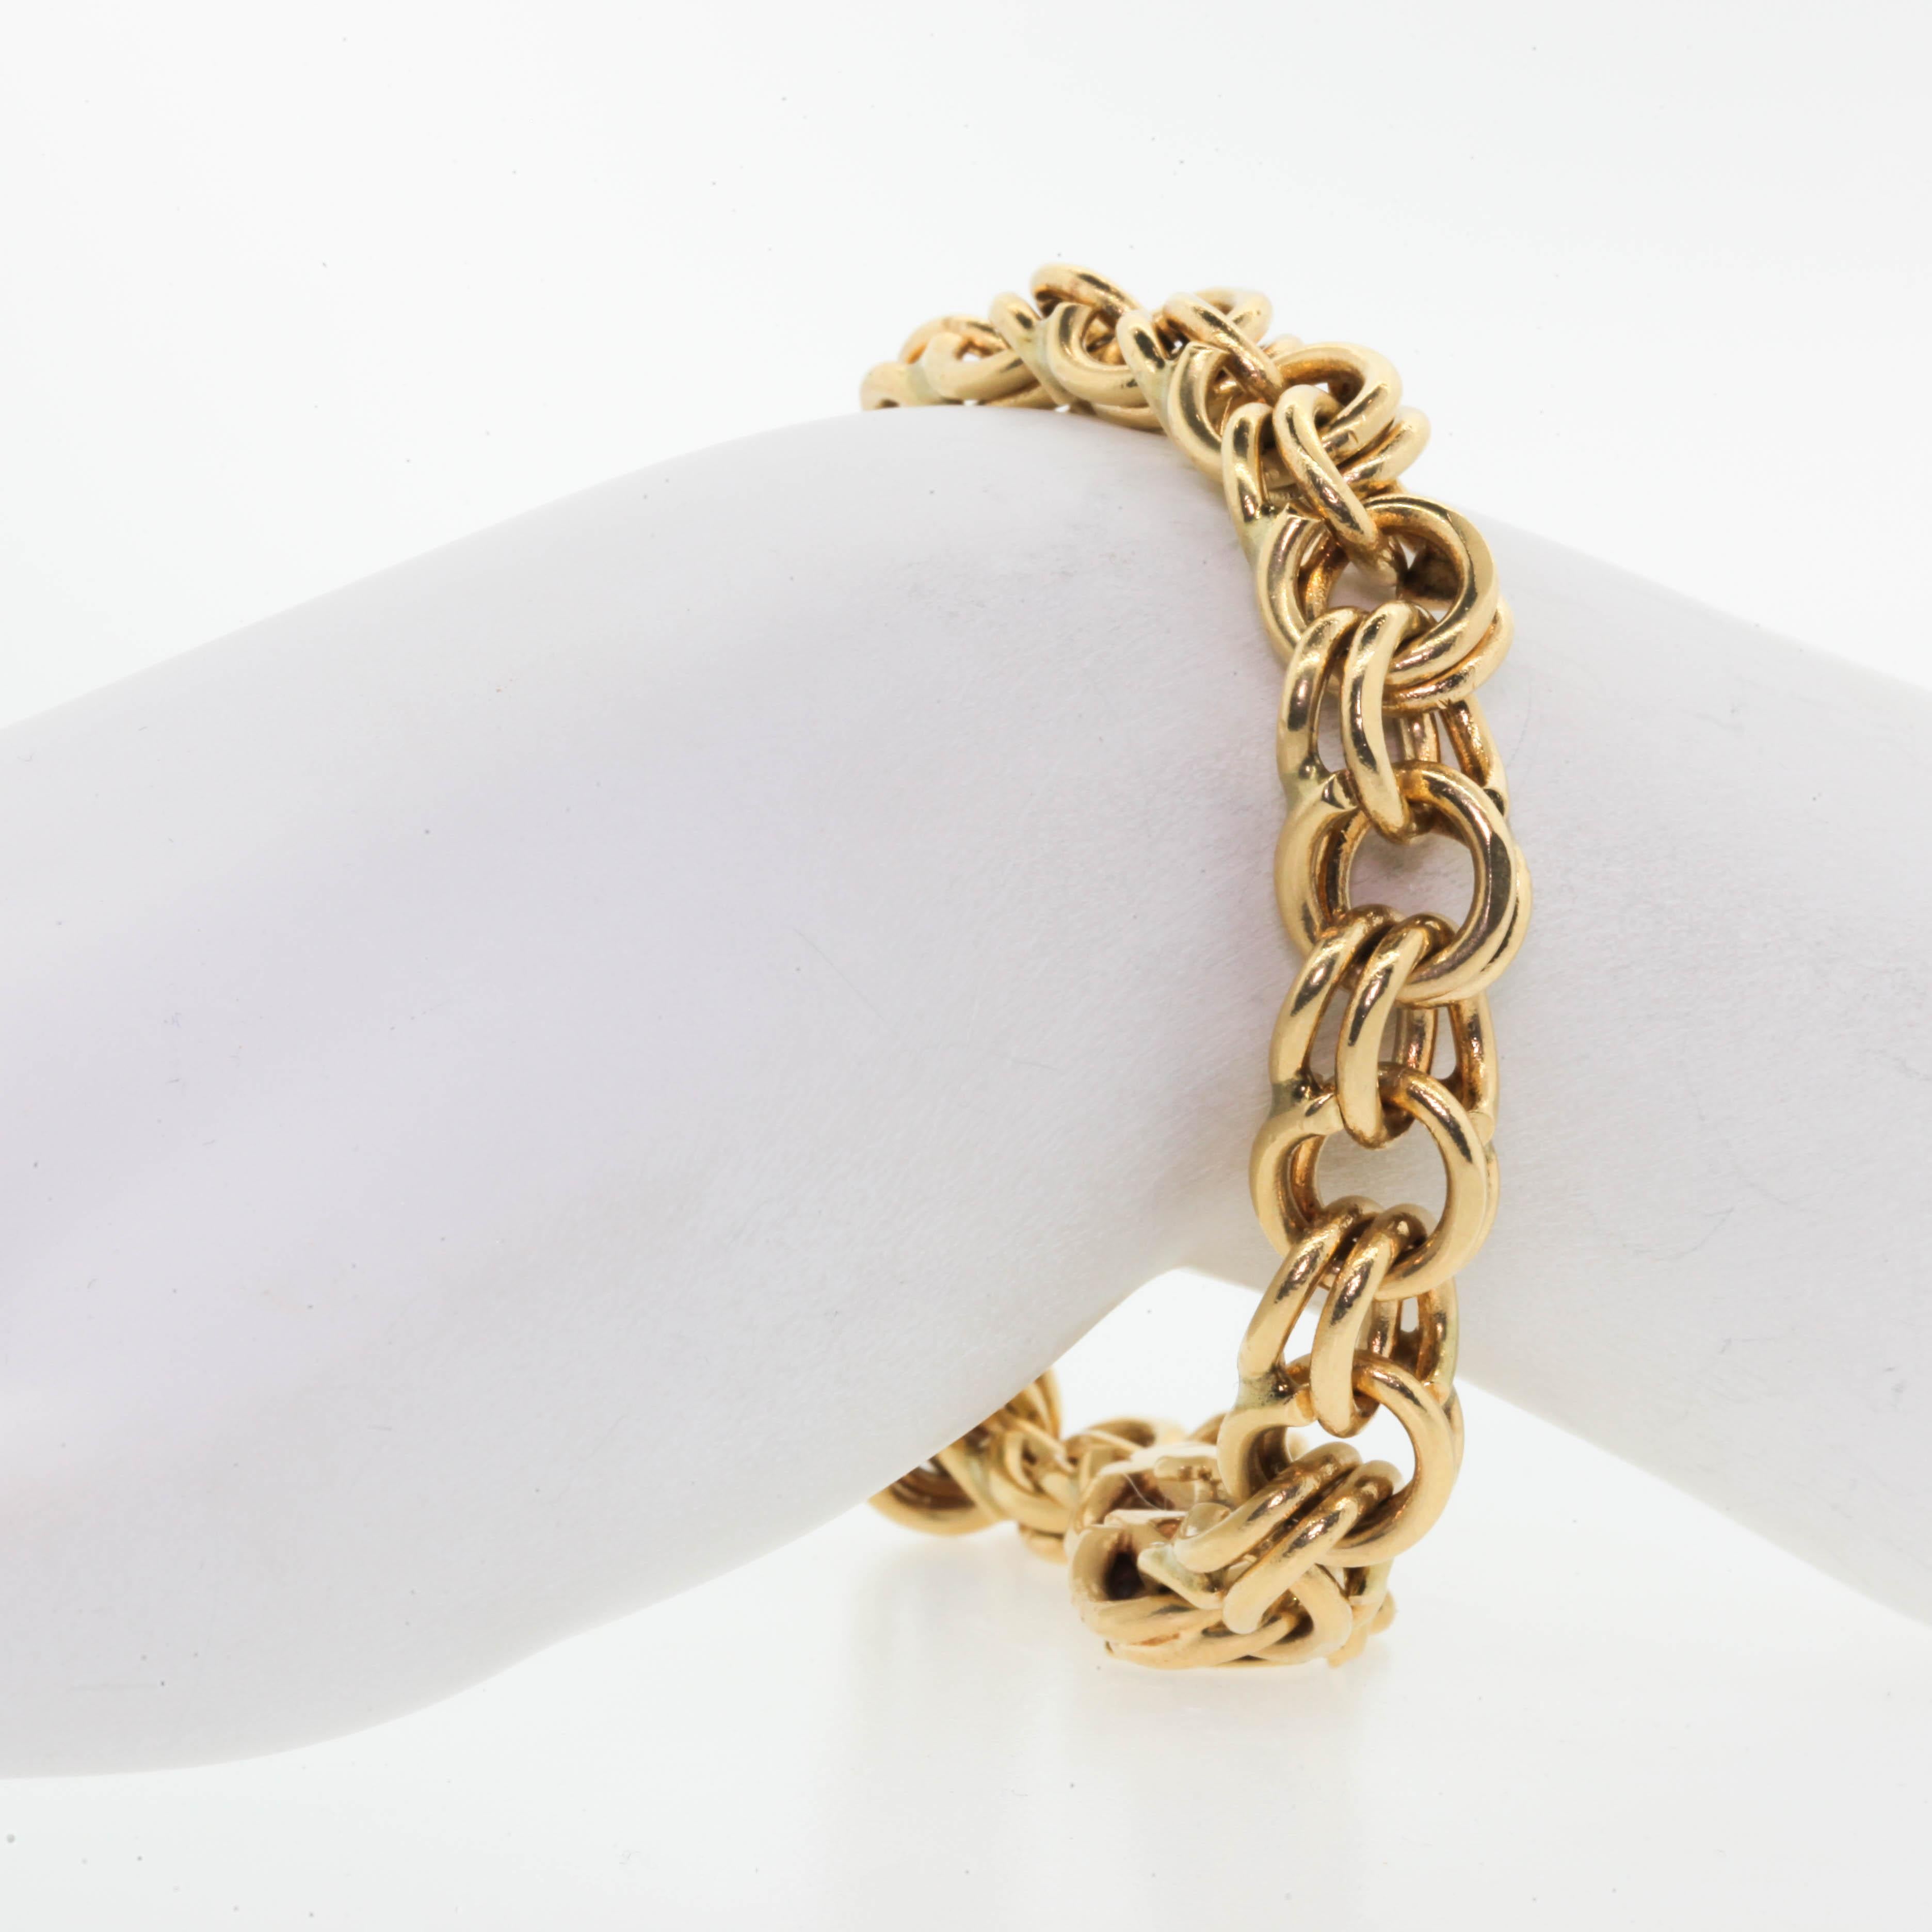 This is  the iconic gold bracelet from the 1950s & 1960s that can be worn as is or with charms added.  The double circle links give it a buttery feel to 7 7/8 inch long bracelet.  Your everyday bracelet!